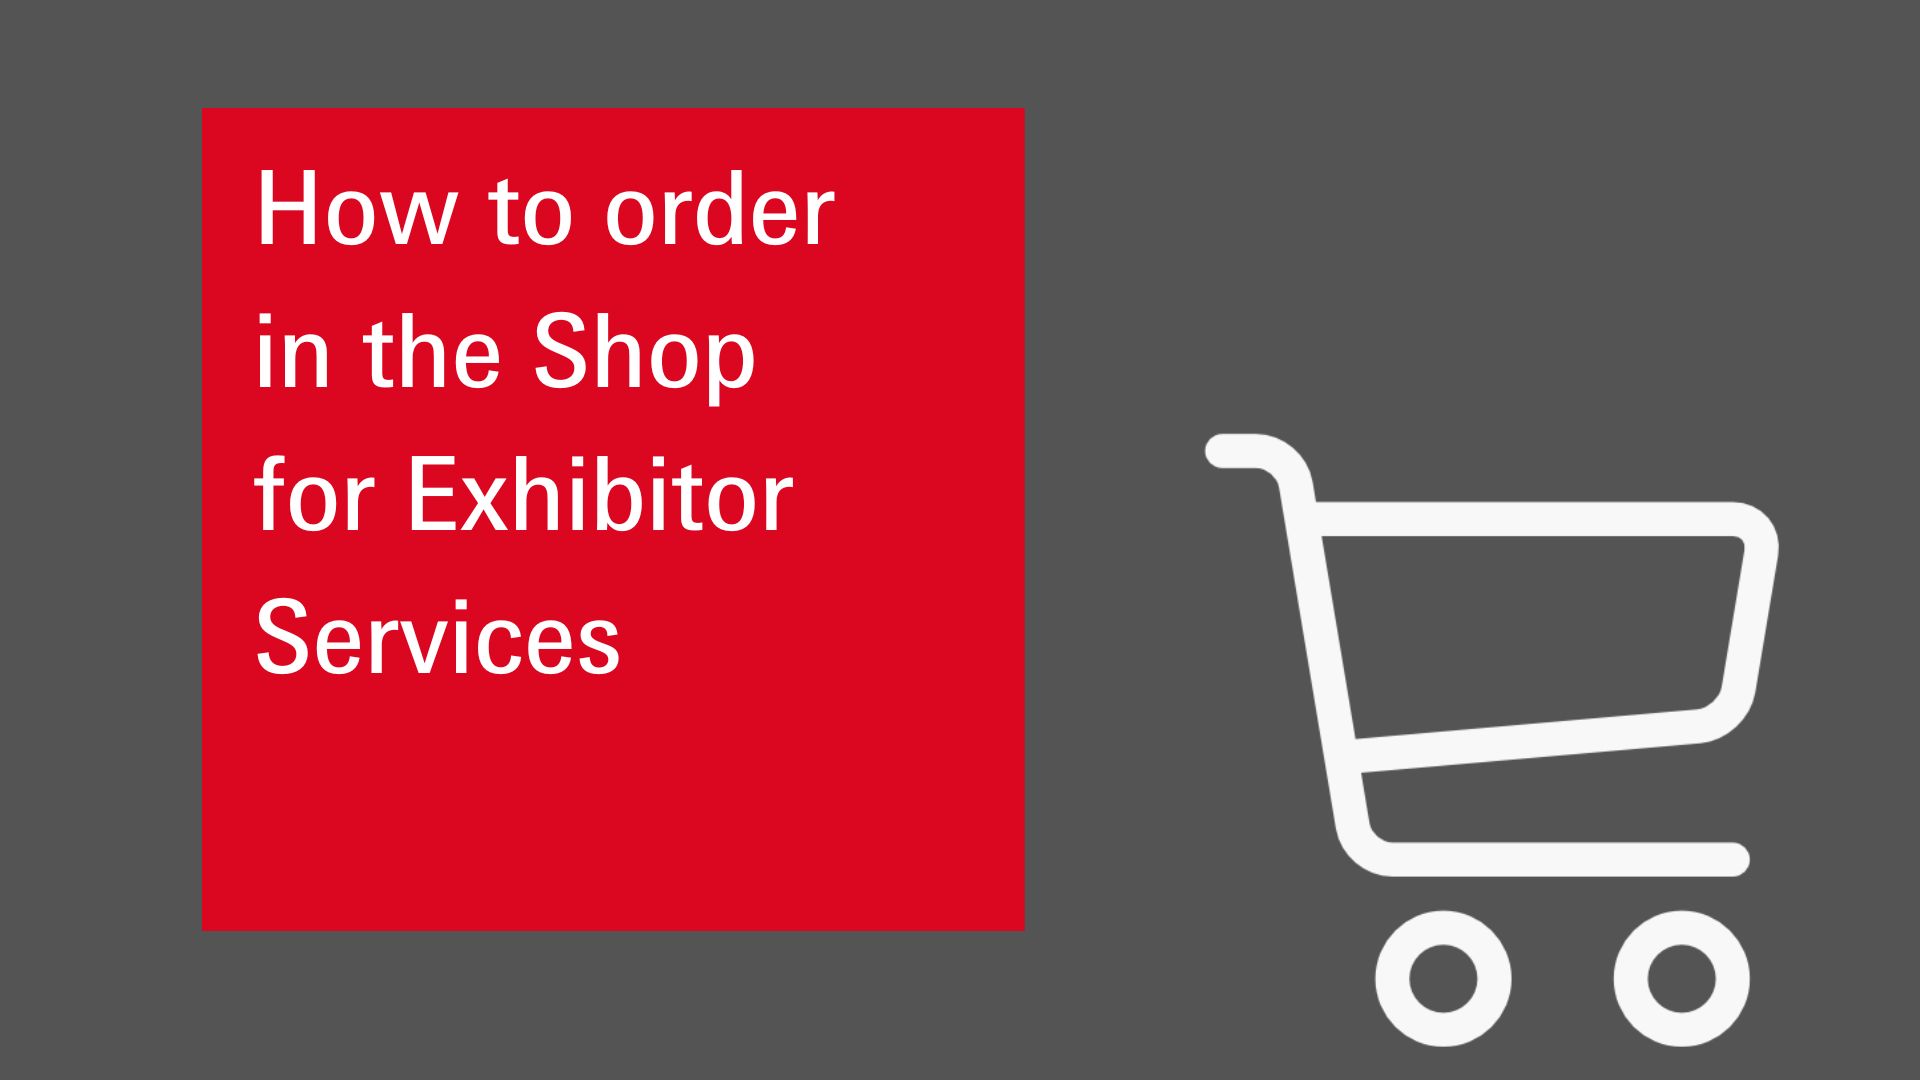 How to order in the Shop for Exhibitor Services